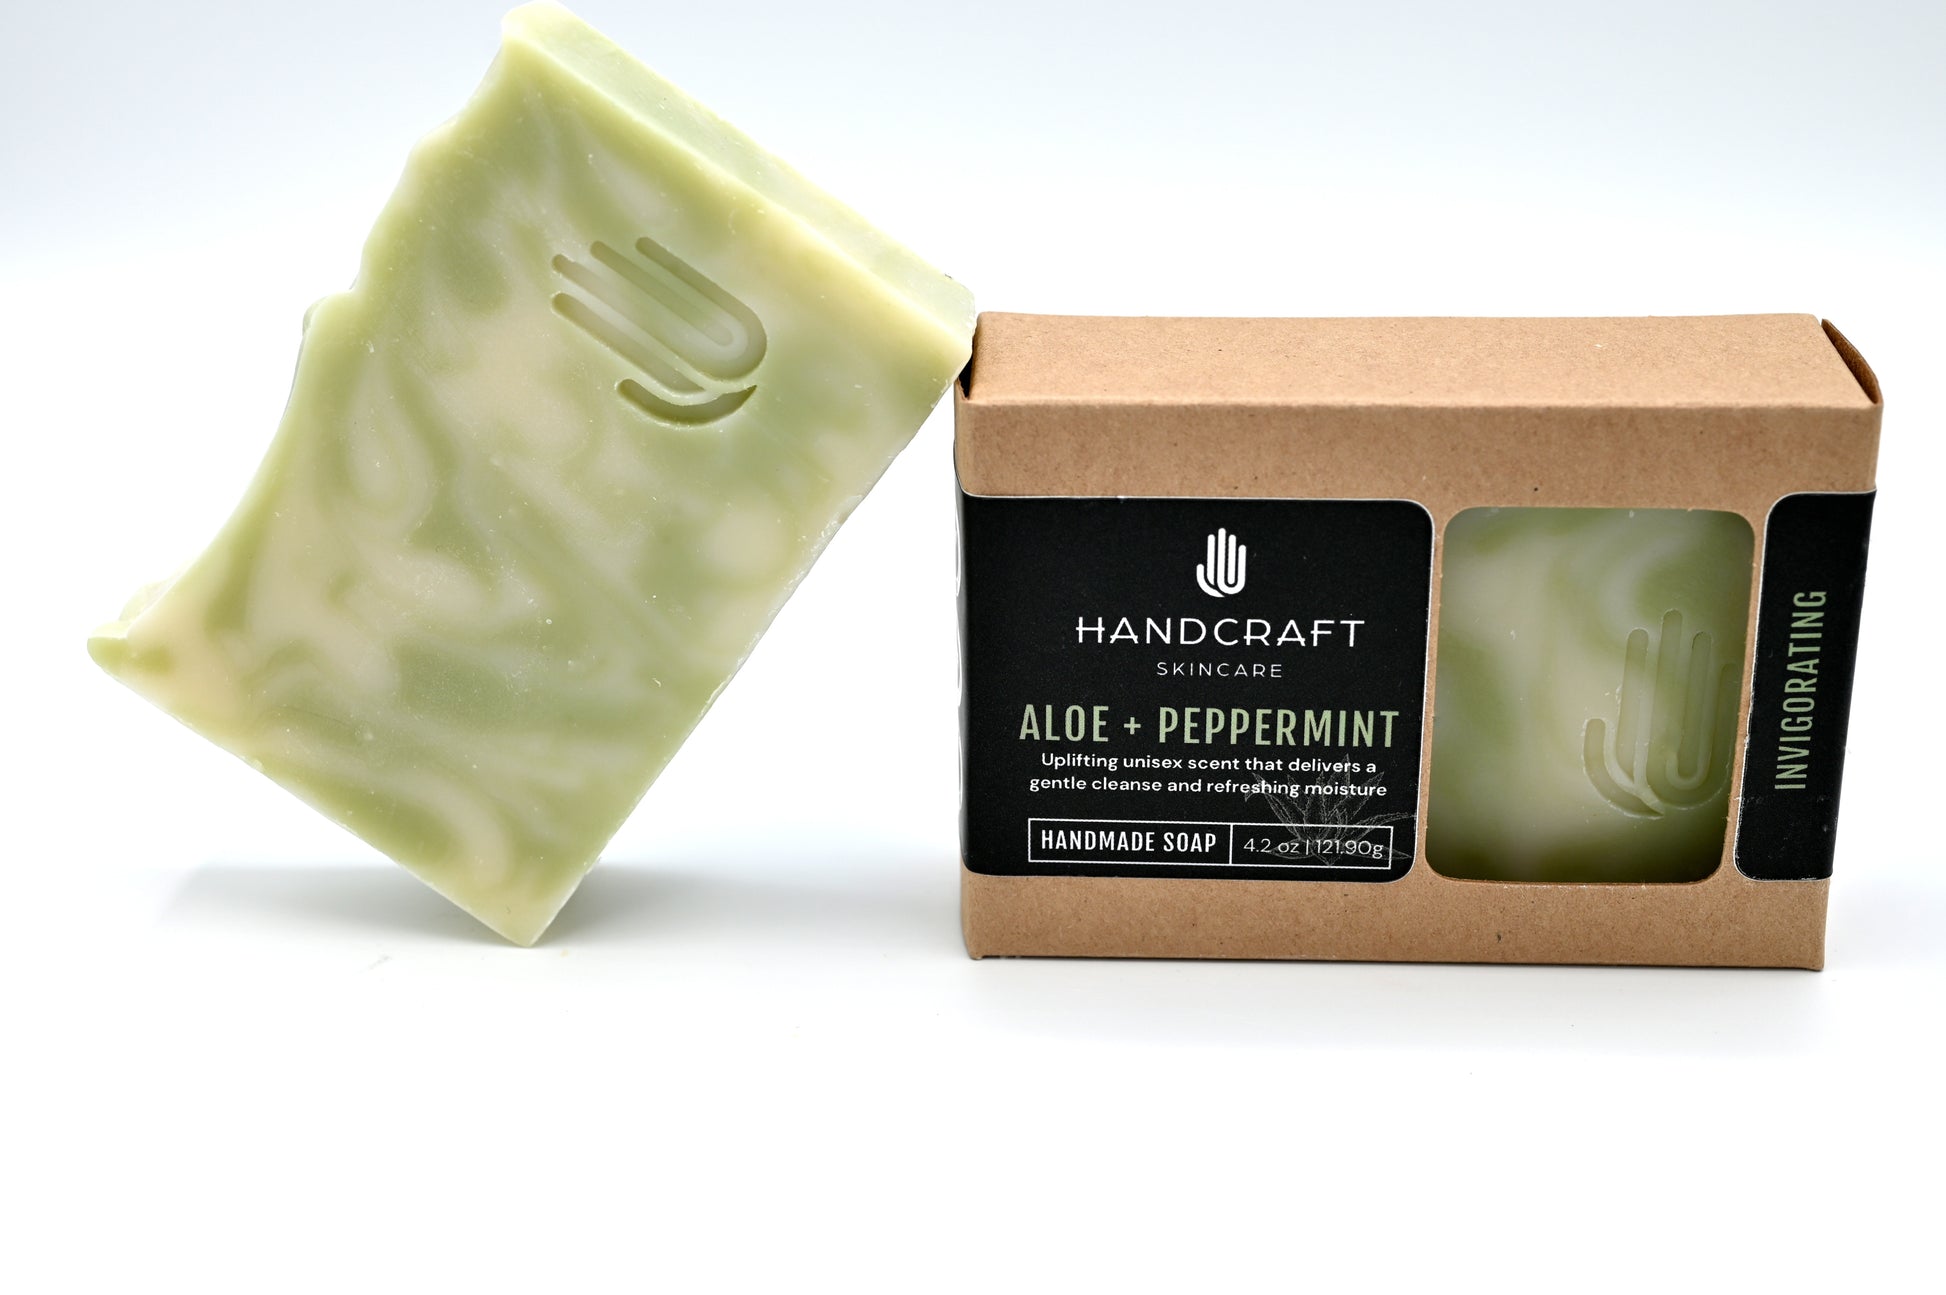 green and white swirled aloe soap is unpackaged and leaning at an angle on a packaged aloe soap in a Kraft box with a black label